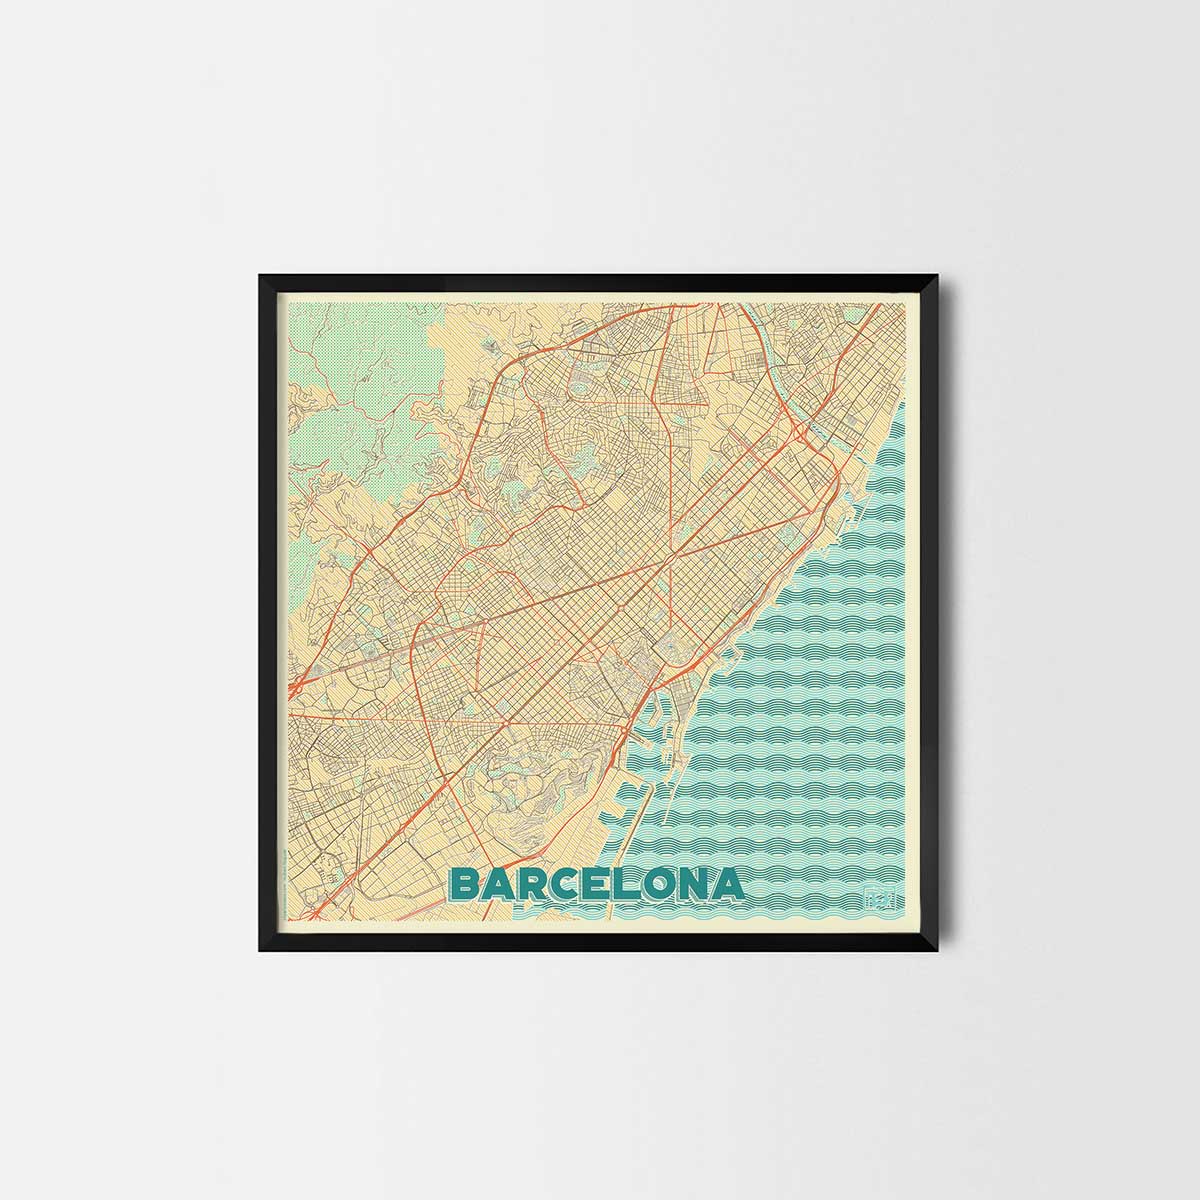 Barcelona City Prints city map art posters retro map posters city map prints city posters retro posters